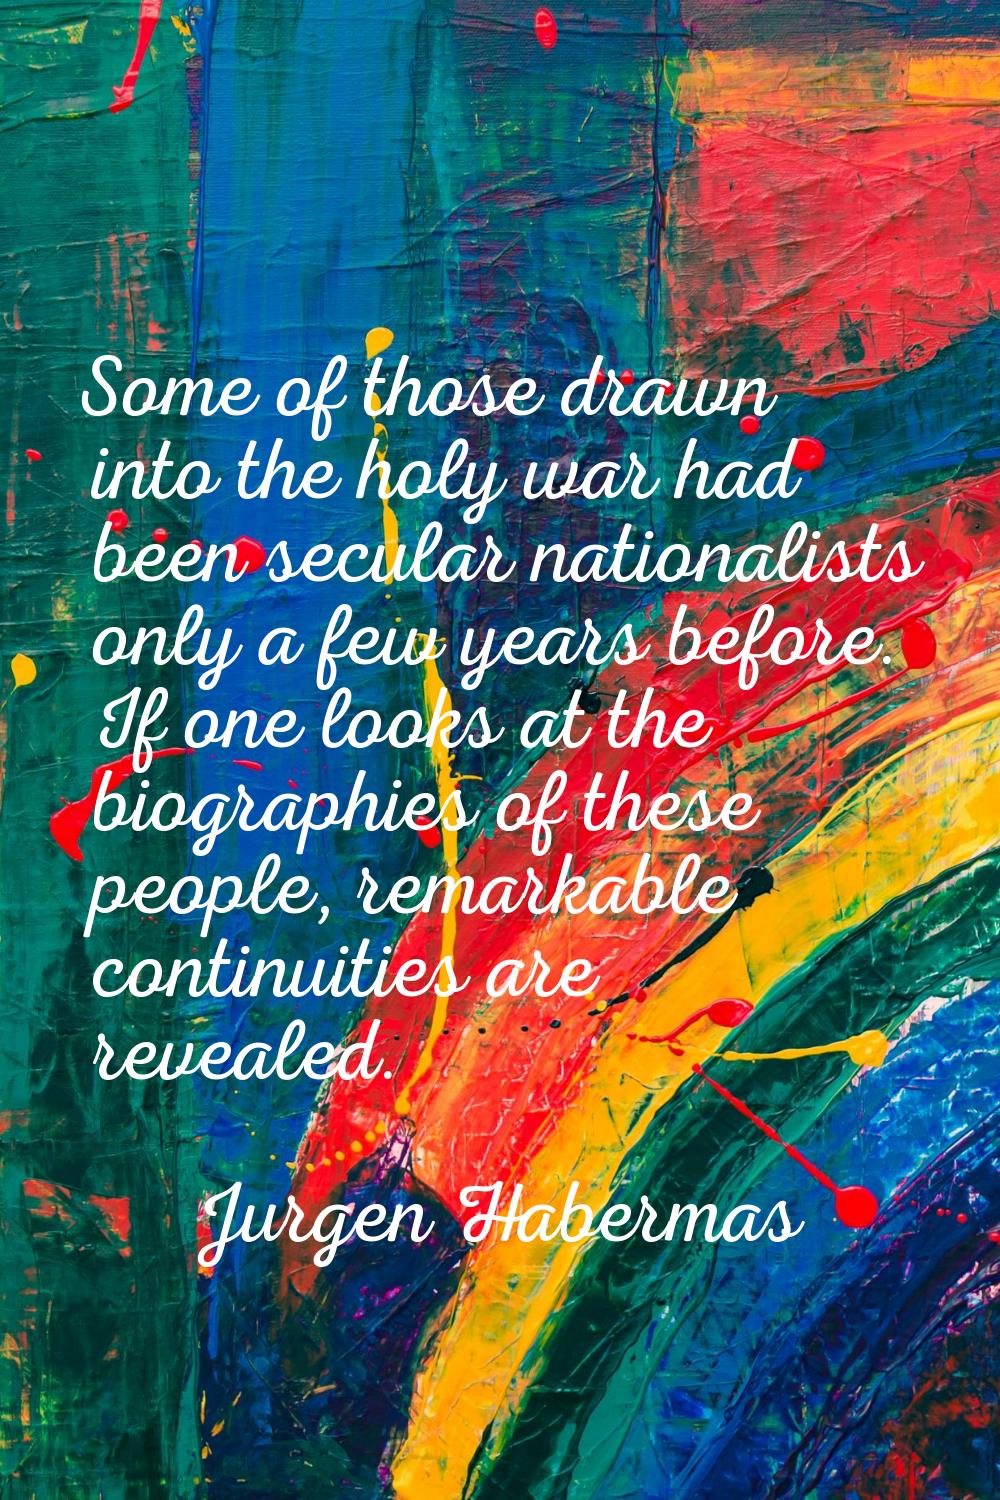 Some of those drawn into the holy war had been secular nationalists only a few years before. If one